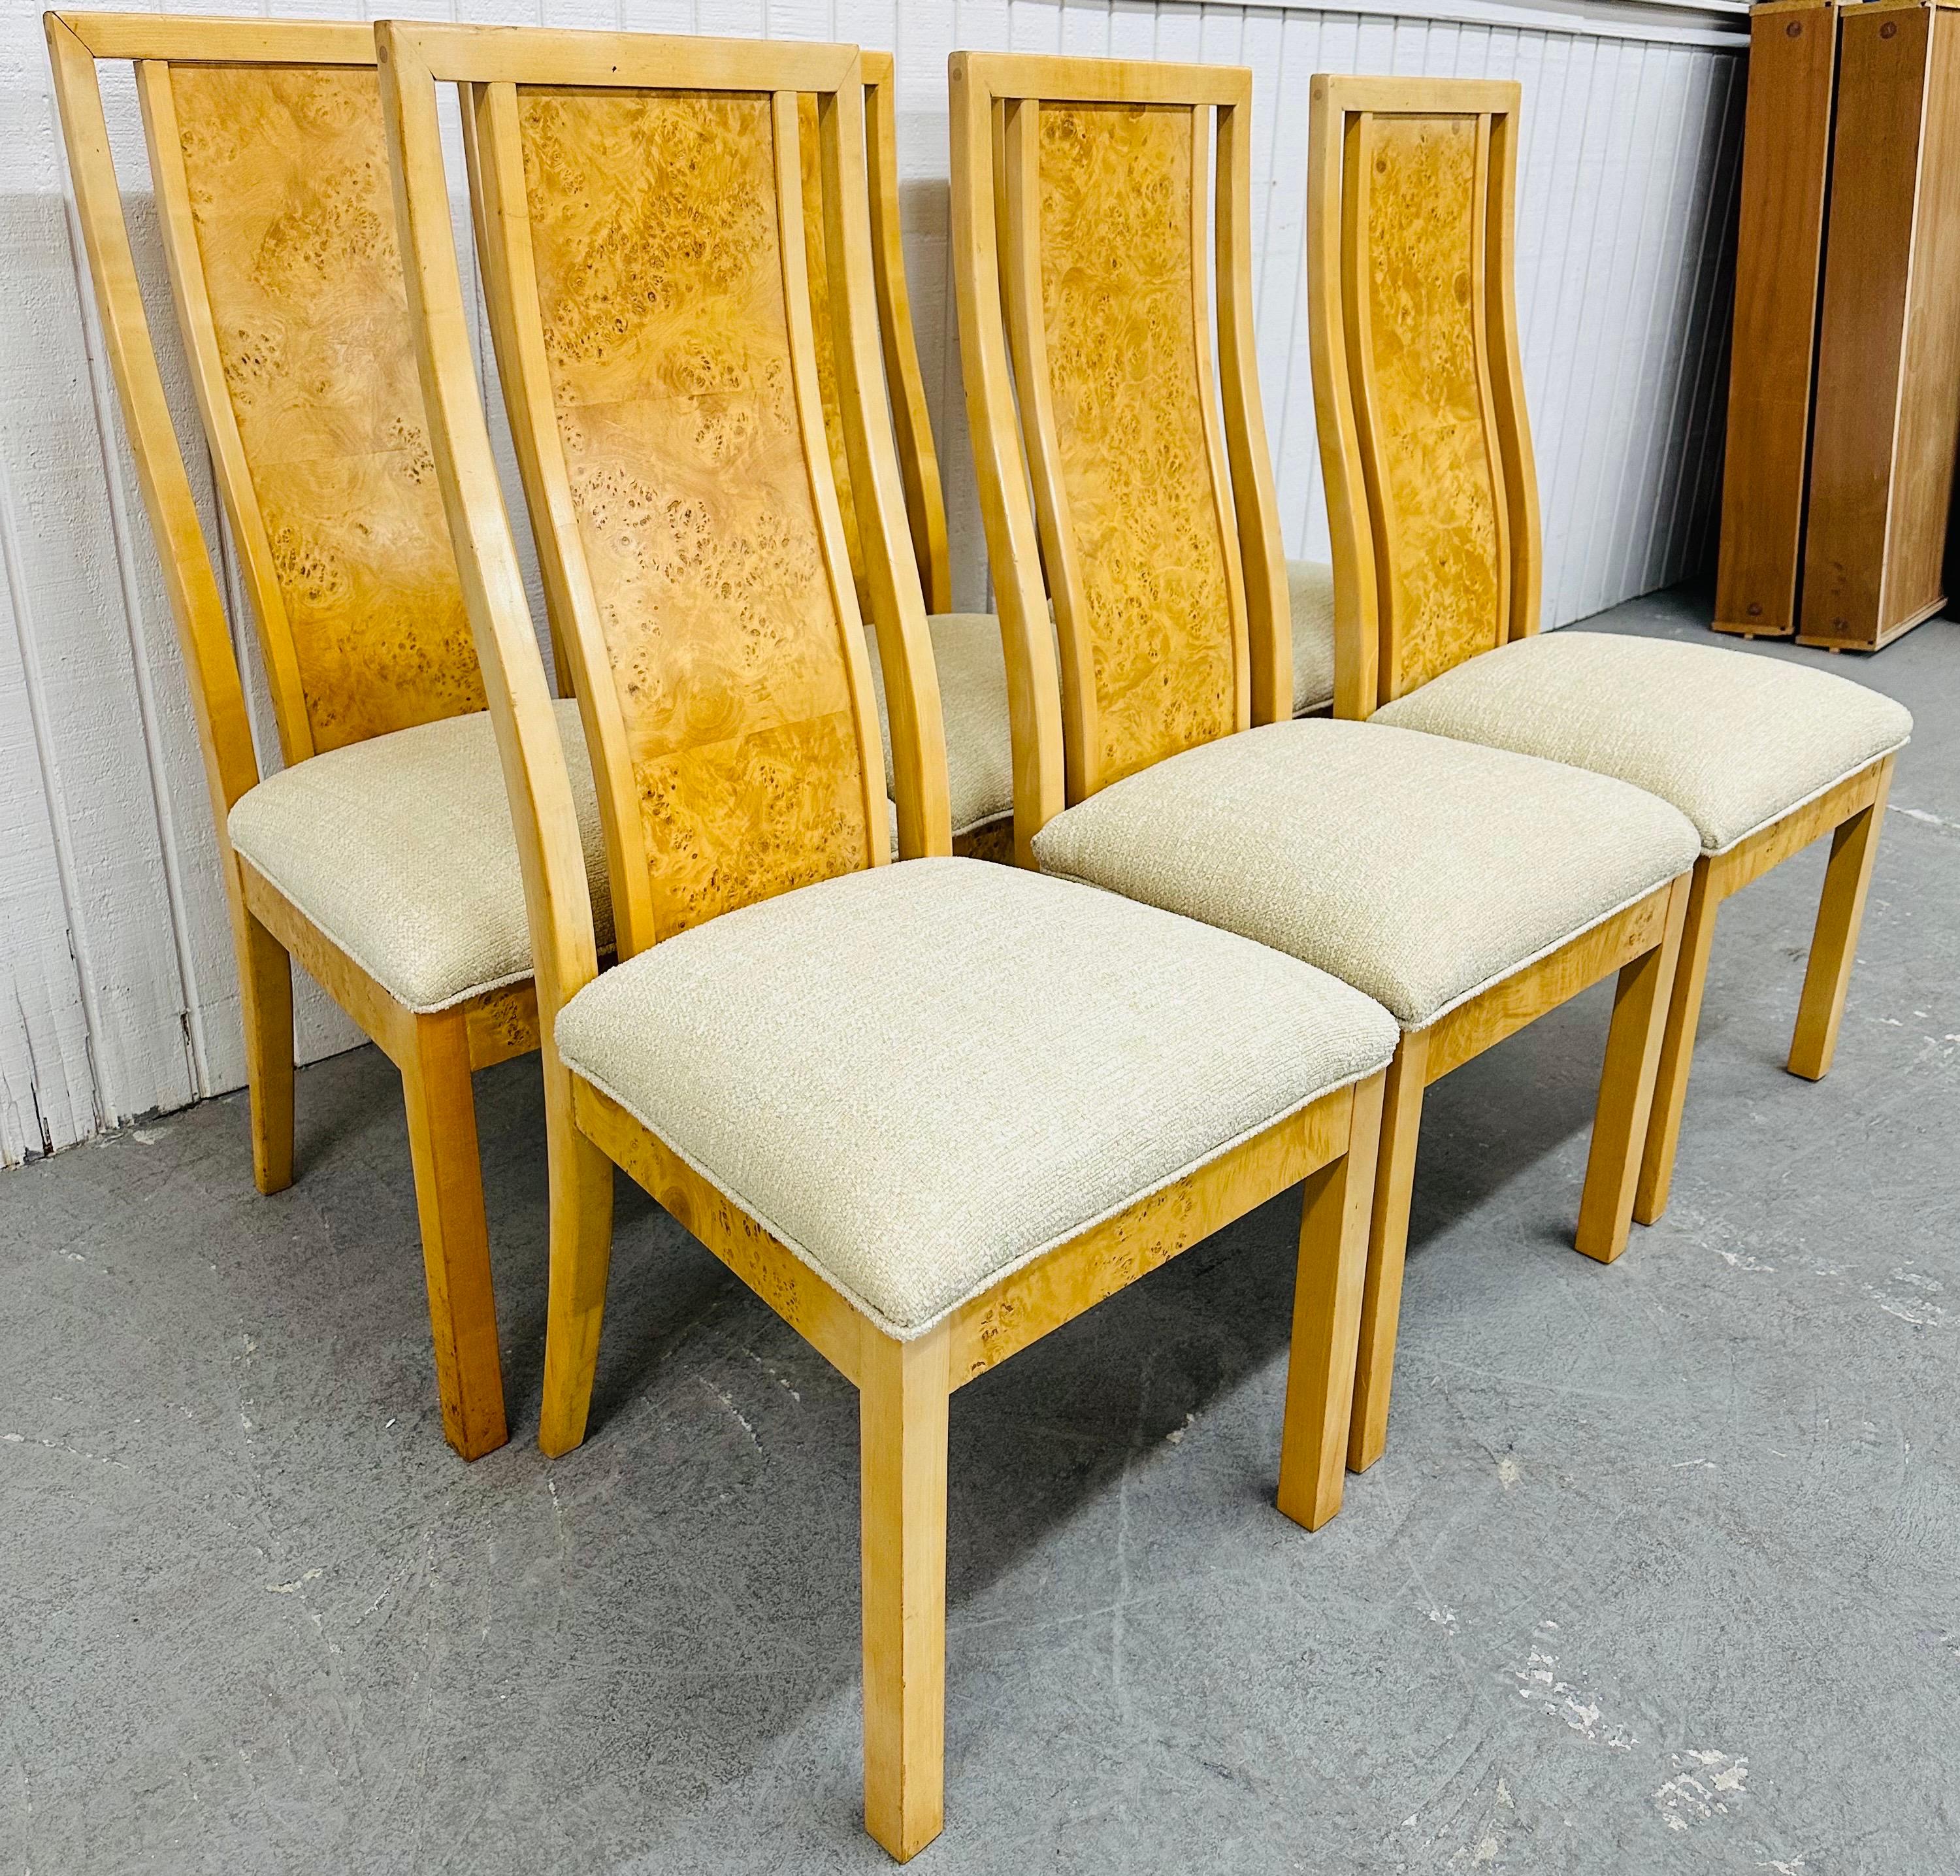 This listing is for a set of six Vintage Modern Burled Wood Dining Chairs. Featuring six side chairs, burled wood frames, and newly upholstered seats. This is an exceptional combination of quality and design!